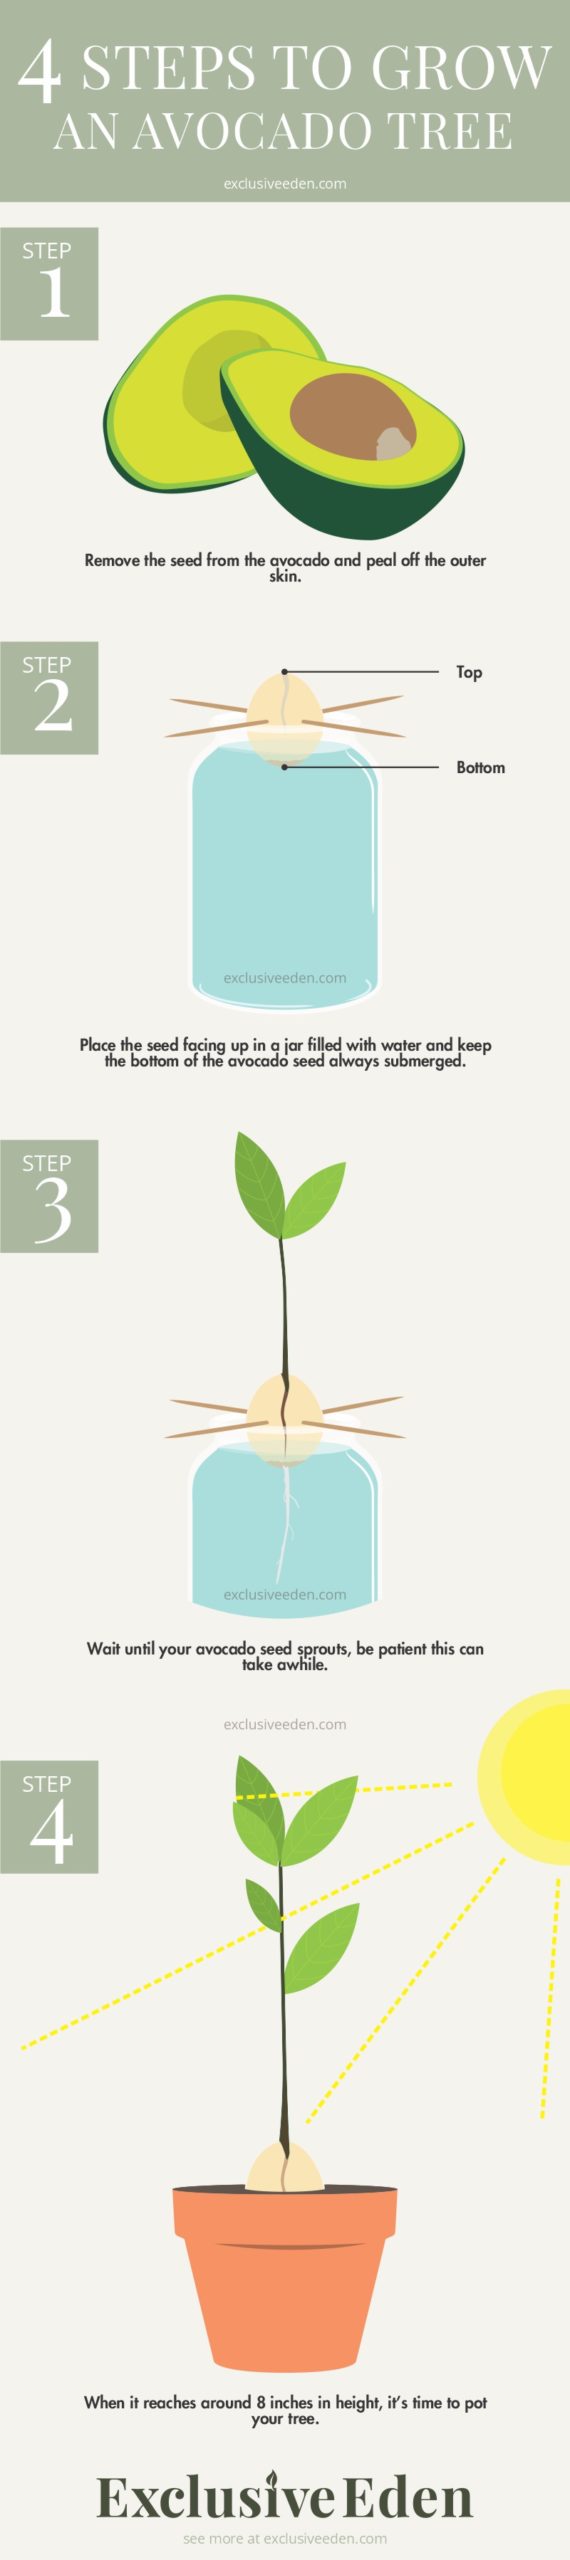 A simple guide to growing an avocado tree infographic.